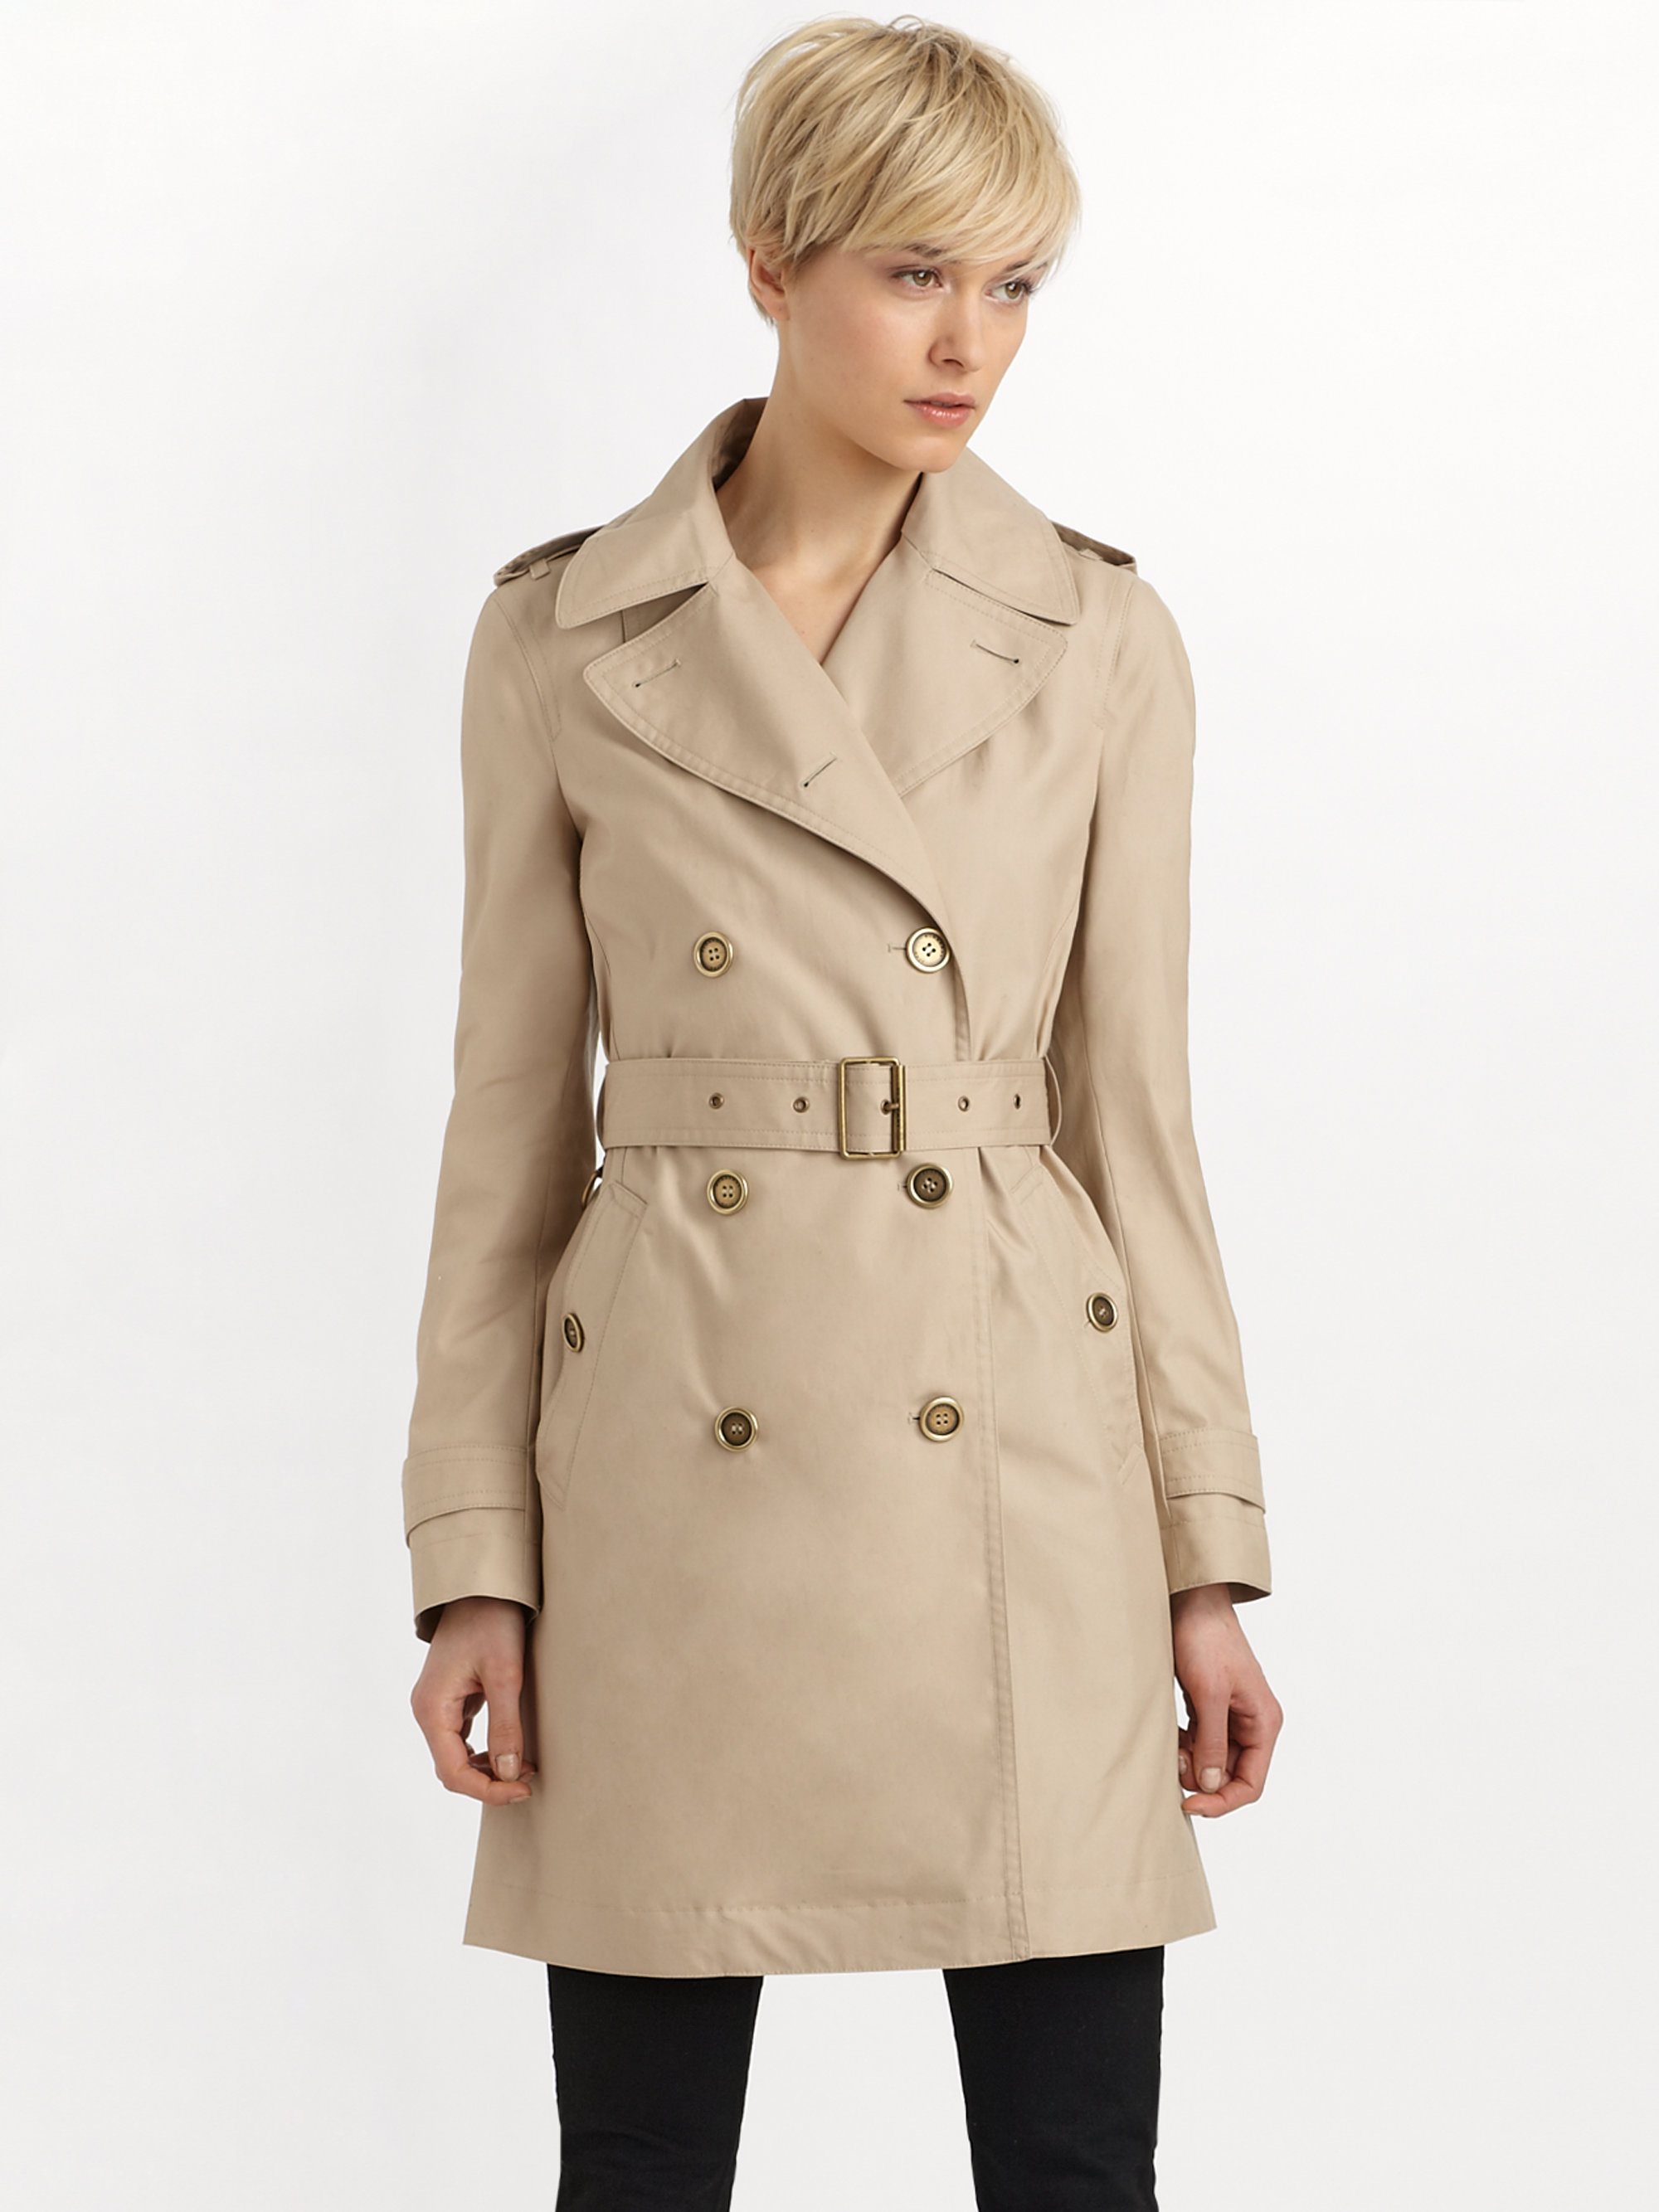 Lyst - Burberry Brit Double breasted Trench-coat in Natural